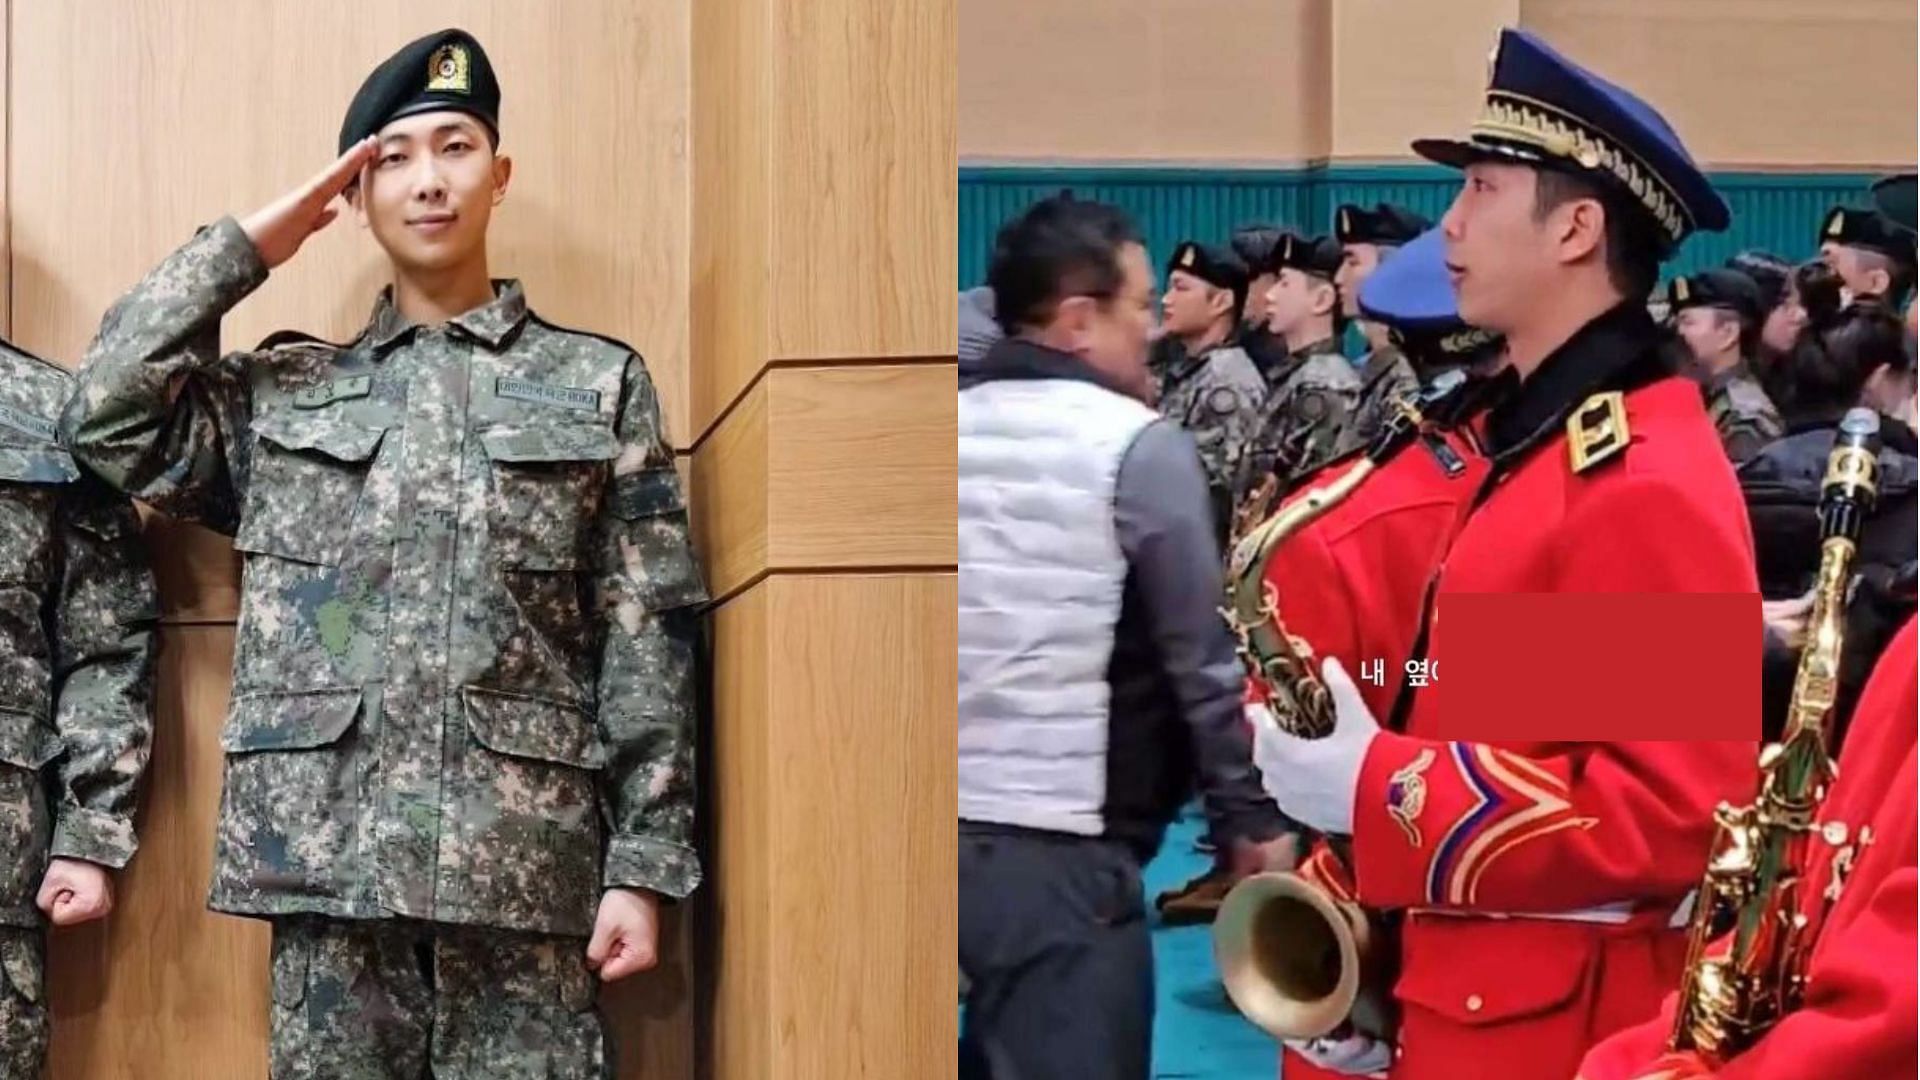 RM spotted with saxophone in the military (Images via Twitter/nightstar1201 and Instagram/rkive)